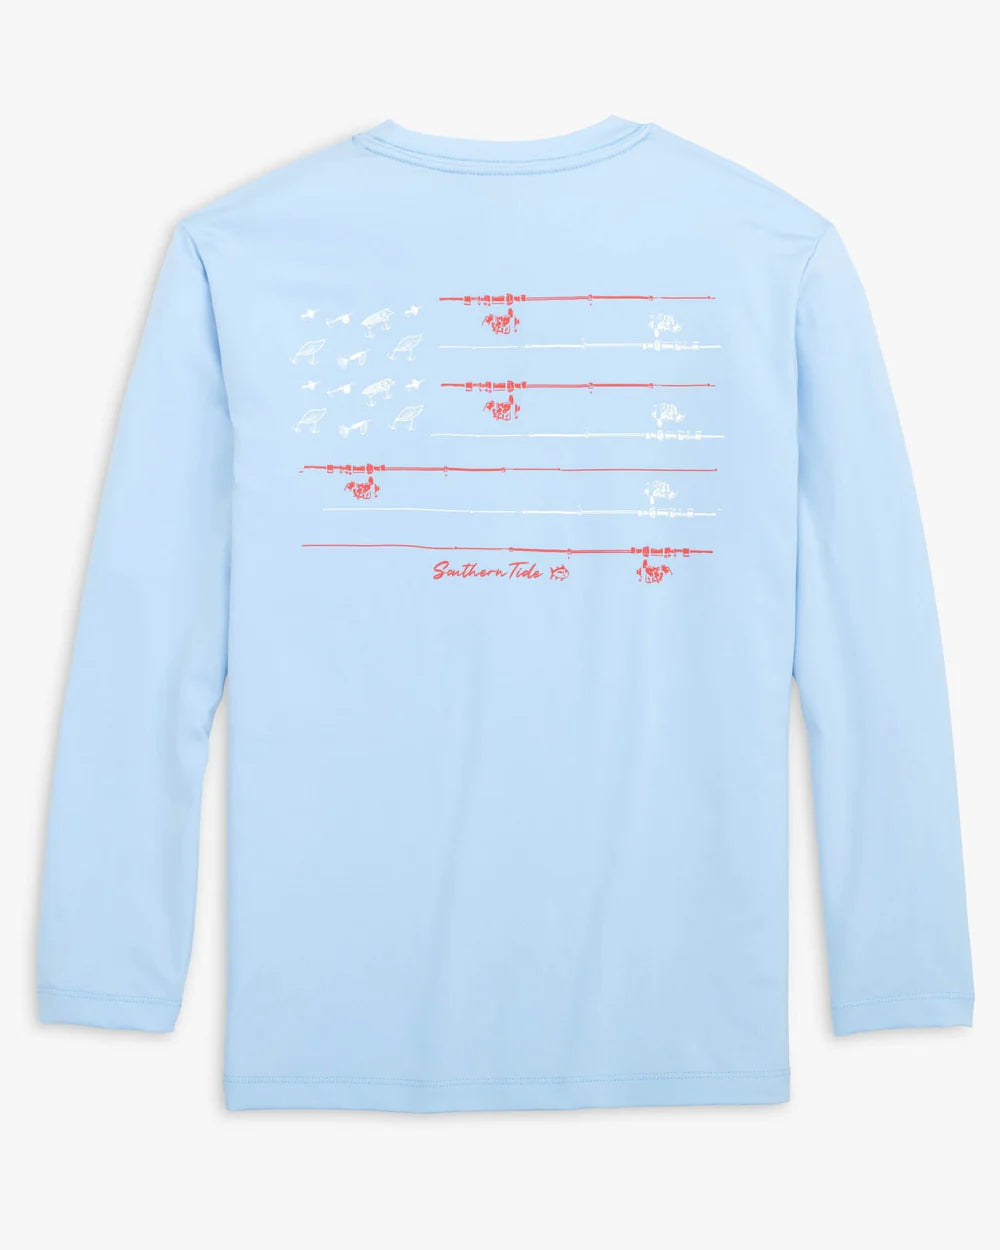 Southern Tide Youth Long Sleeve Performance T-Shirt